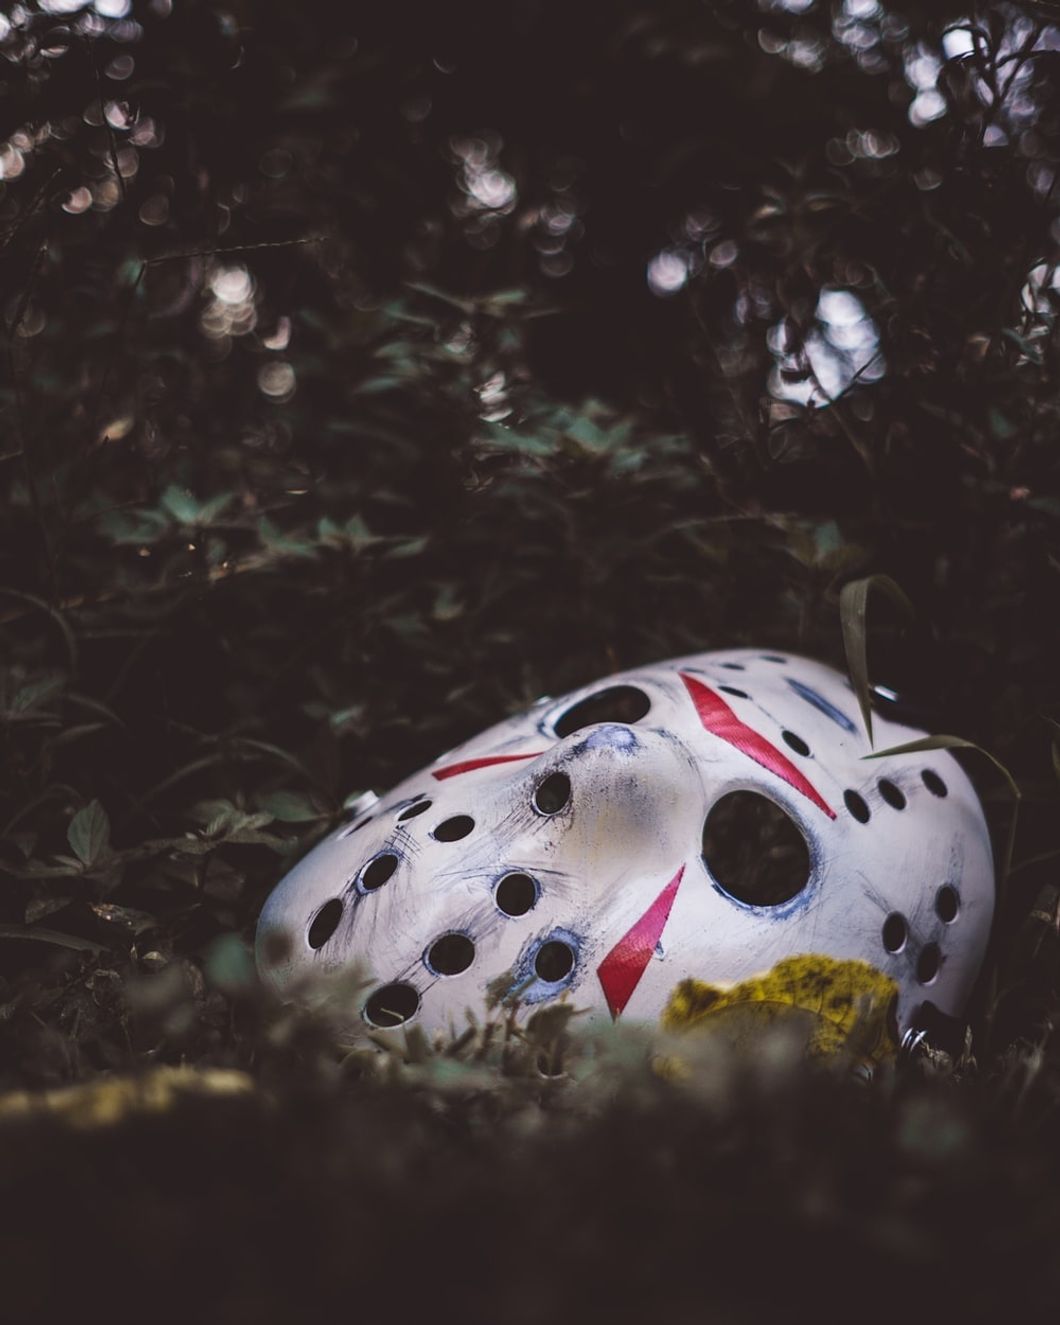 5 Reasons Why Friday The 13th In 2020 Is Not Scary